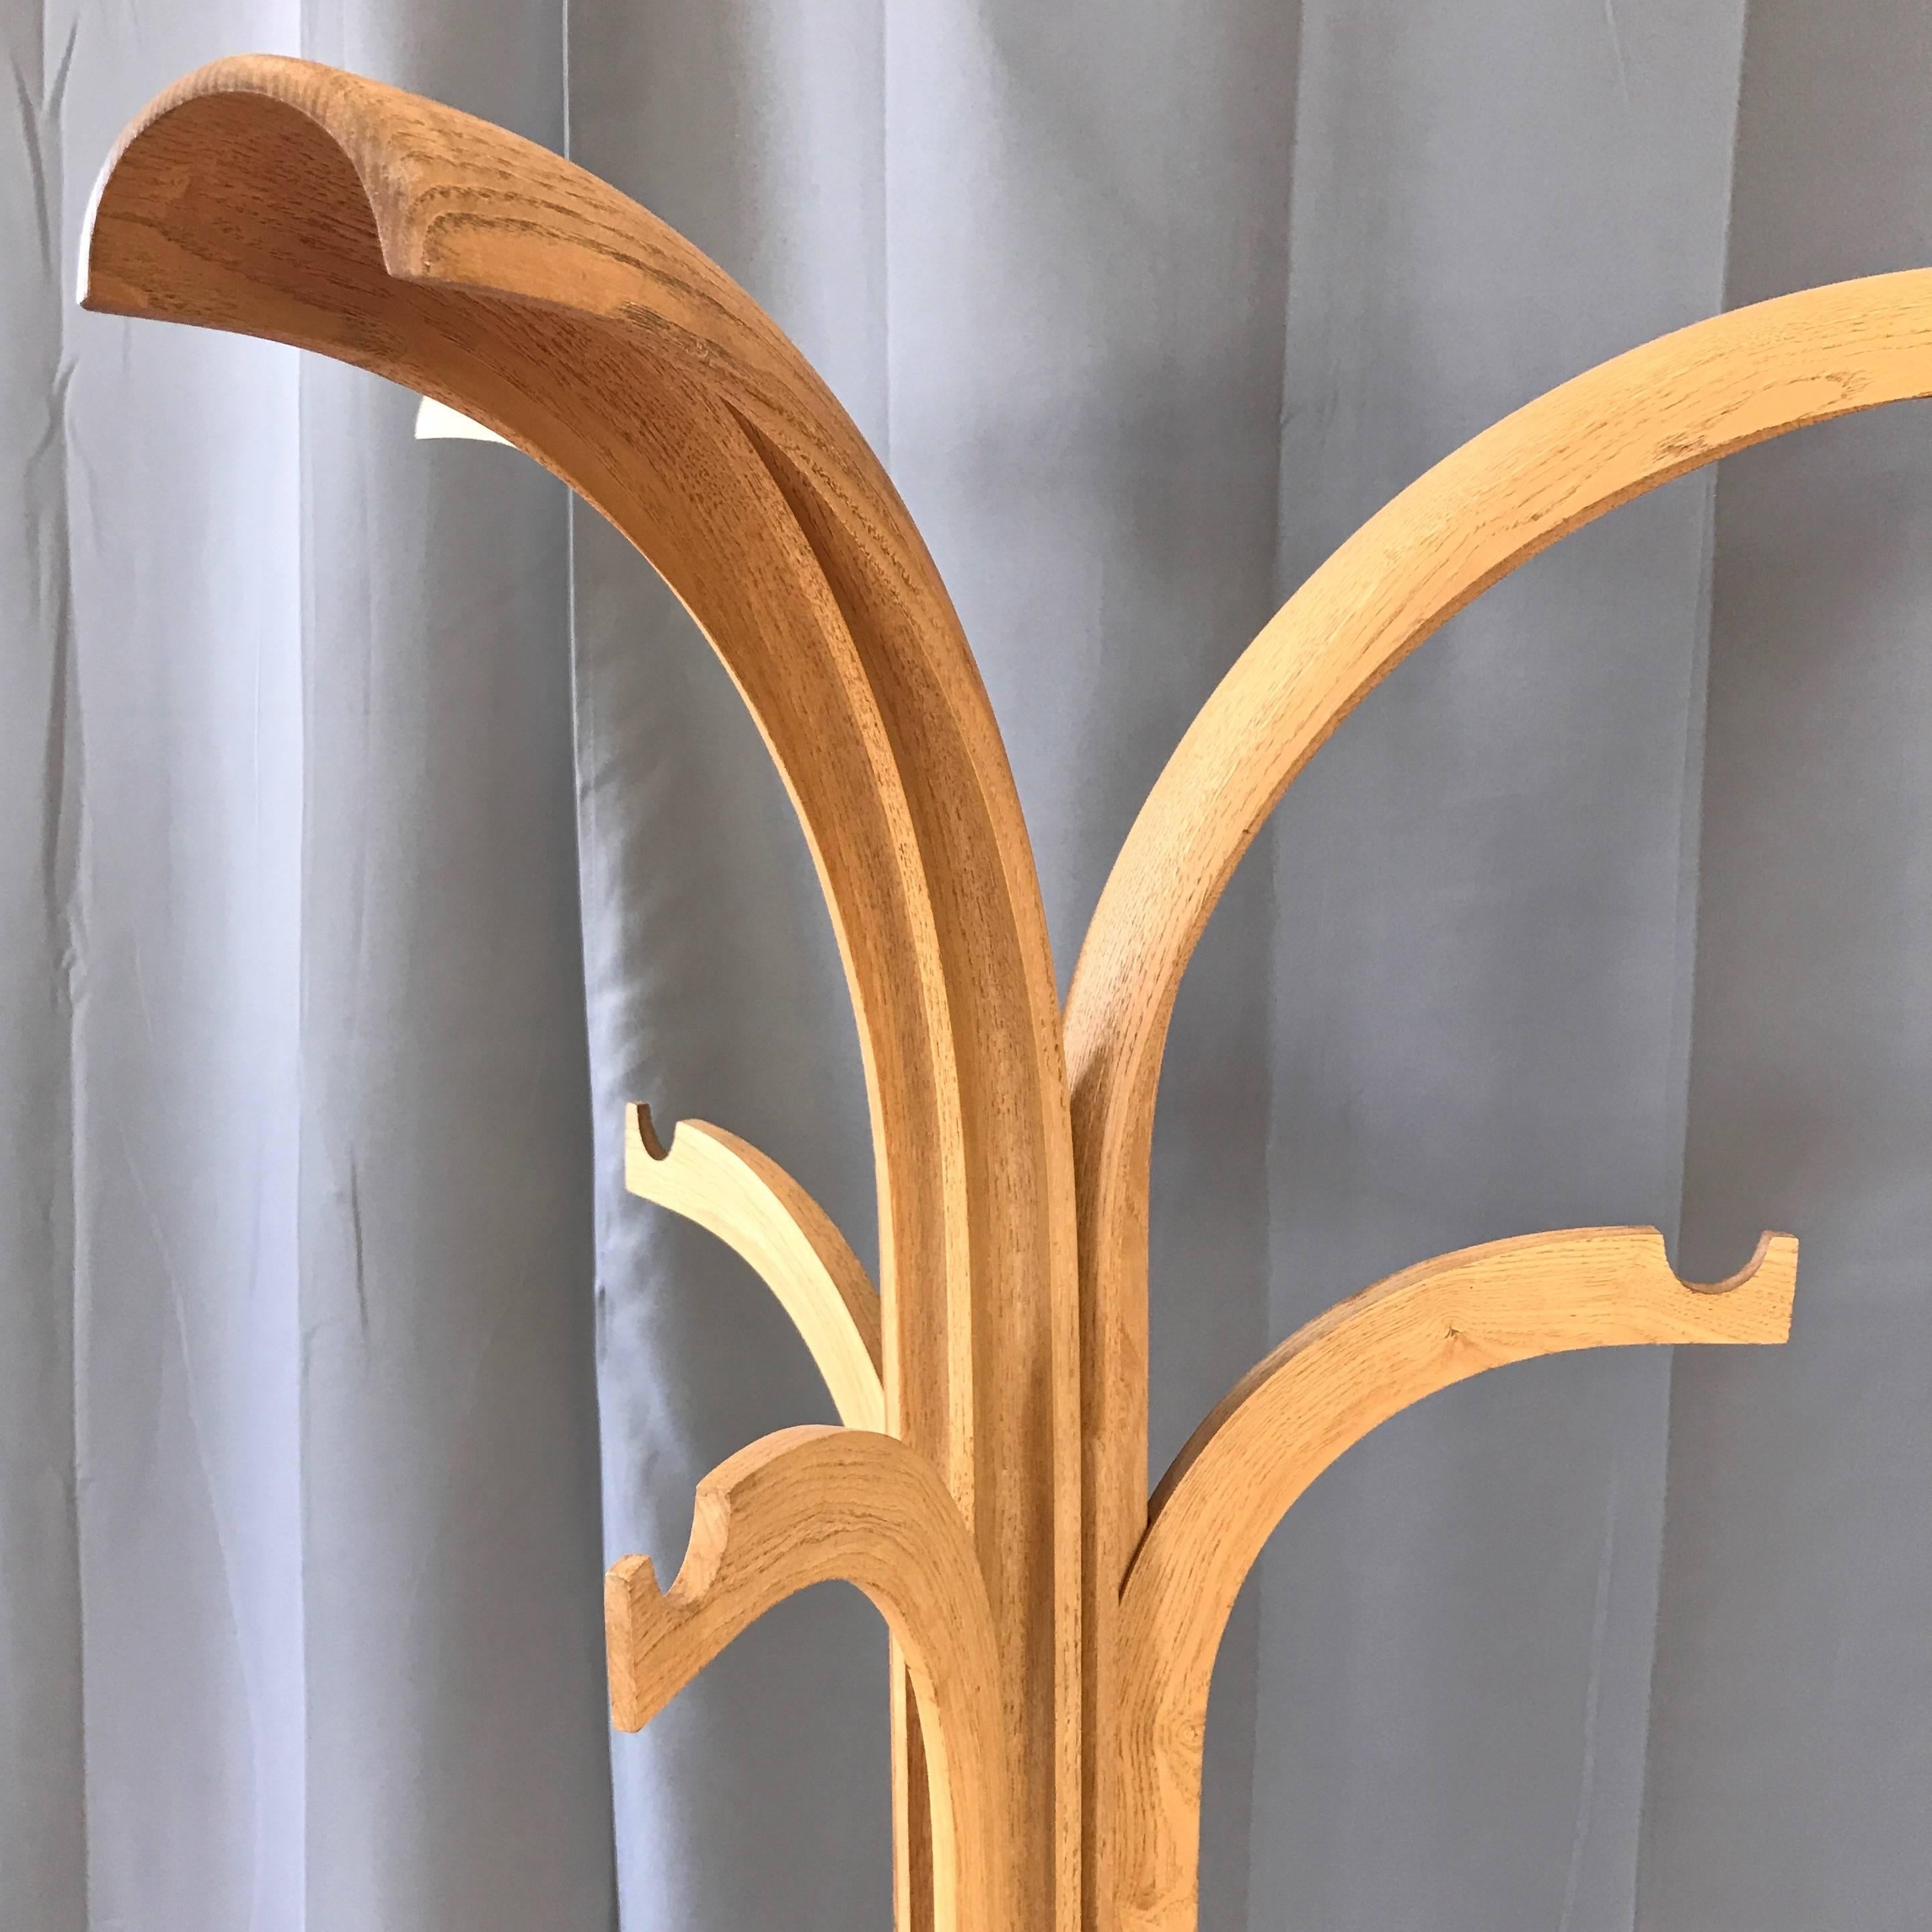 Late 20th Century Vintage Sculptural and Organic Solid Oak Coat Rack